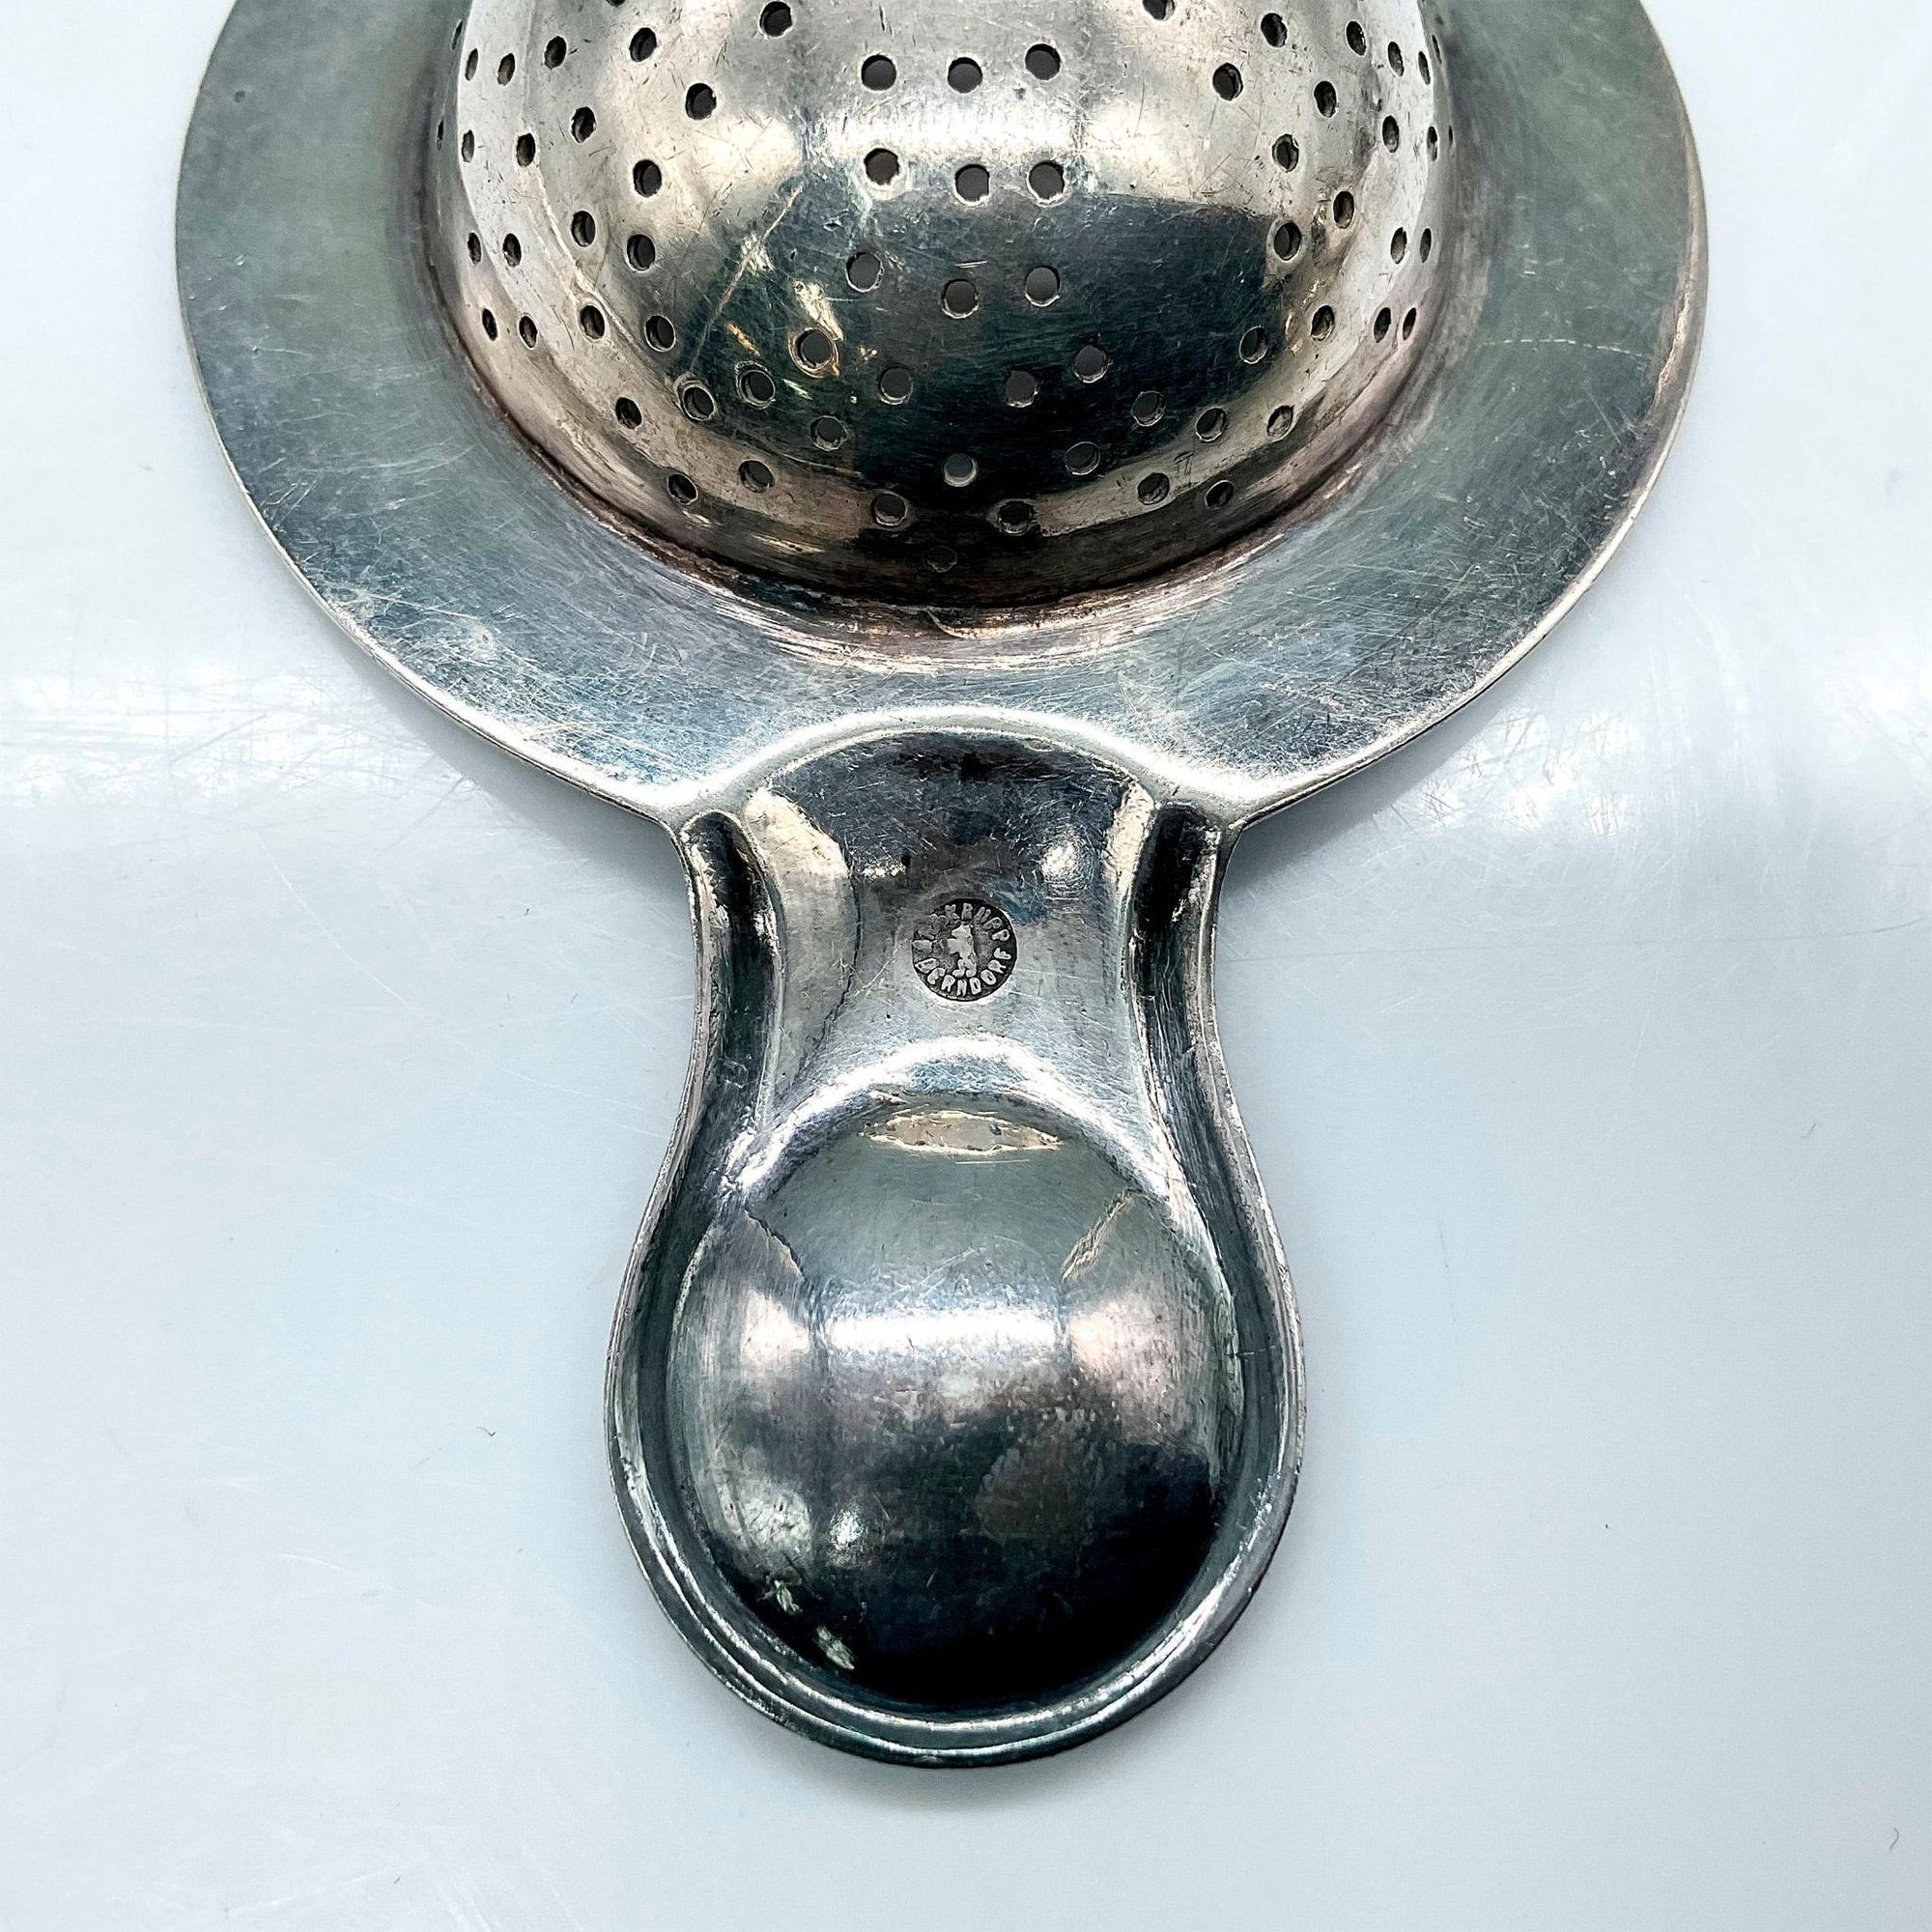 3pc Vintage Silver Plated Tea Strainer - Image 3 of 4